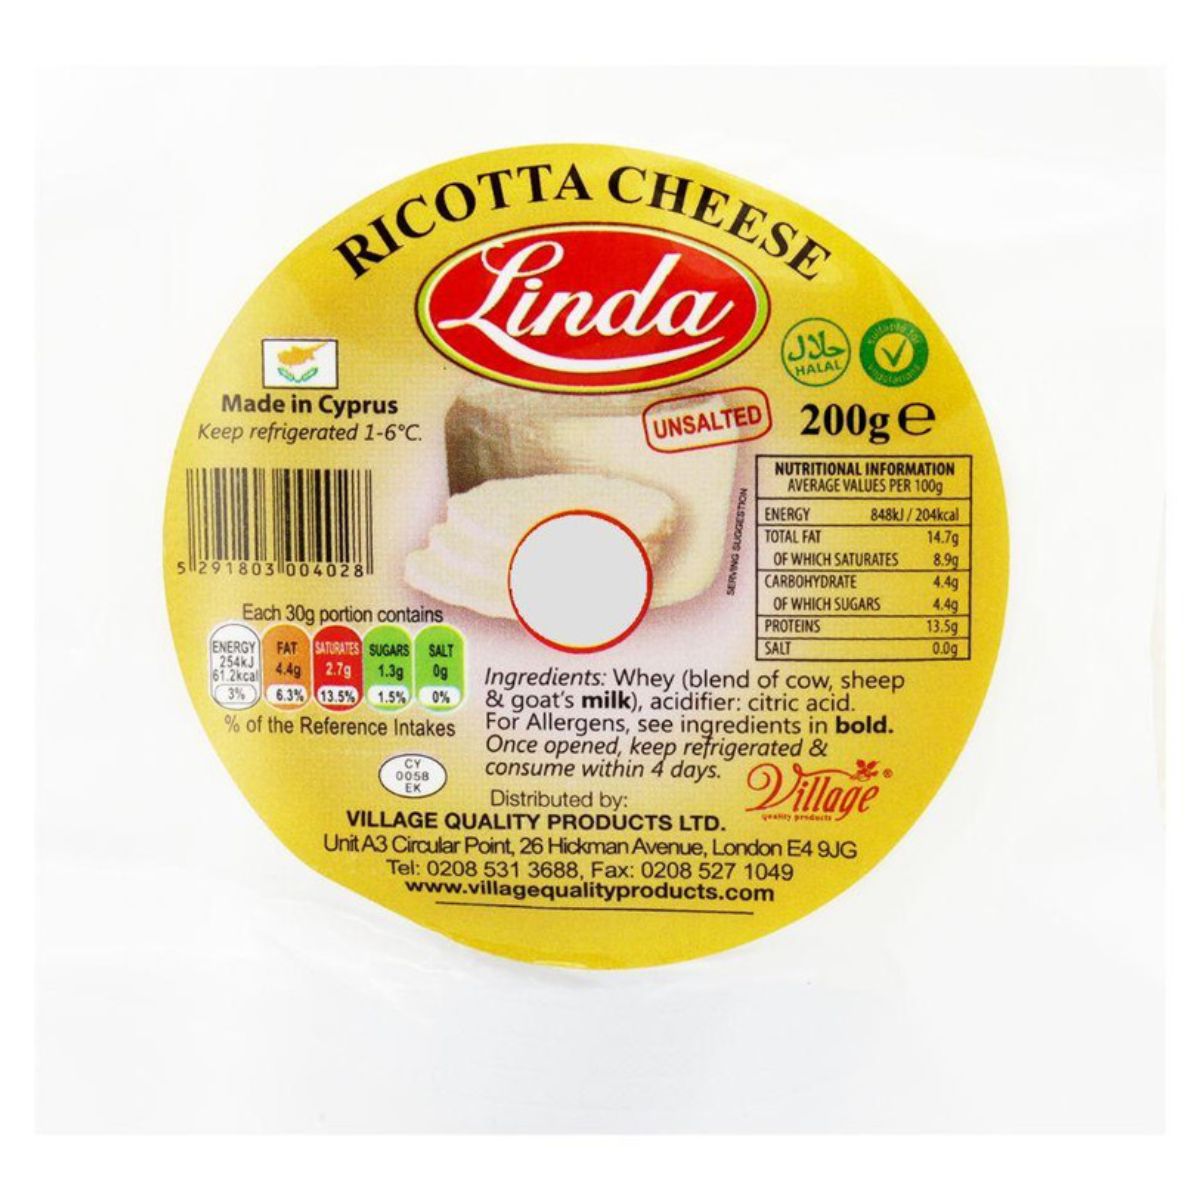 A package of Linda - Ricotta Cheese - 200g on a white background.